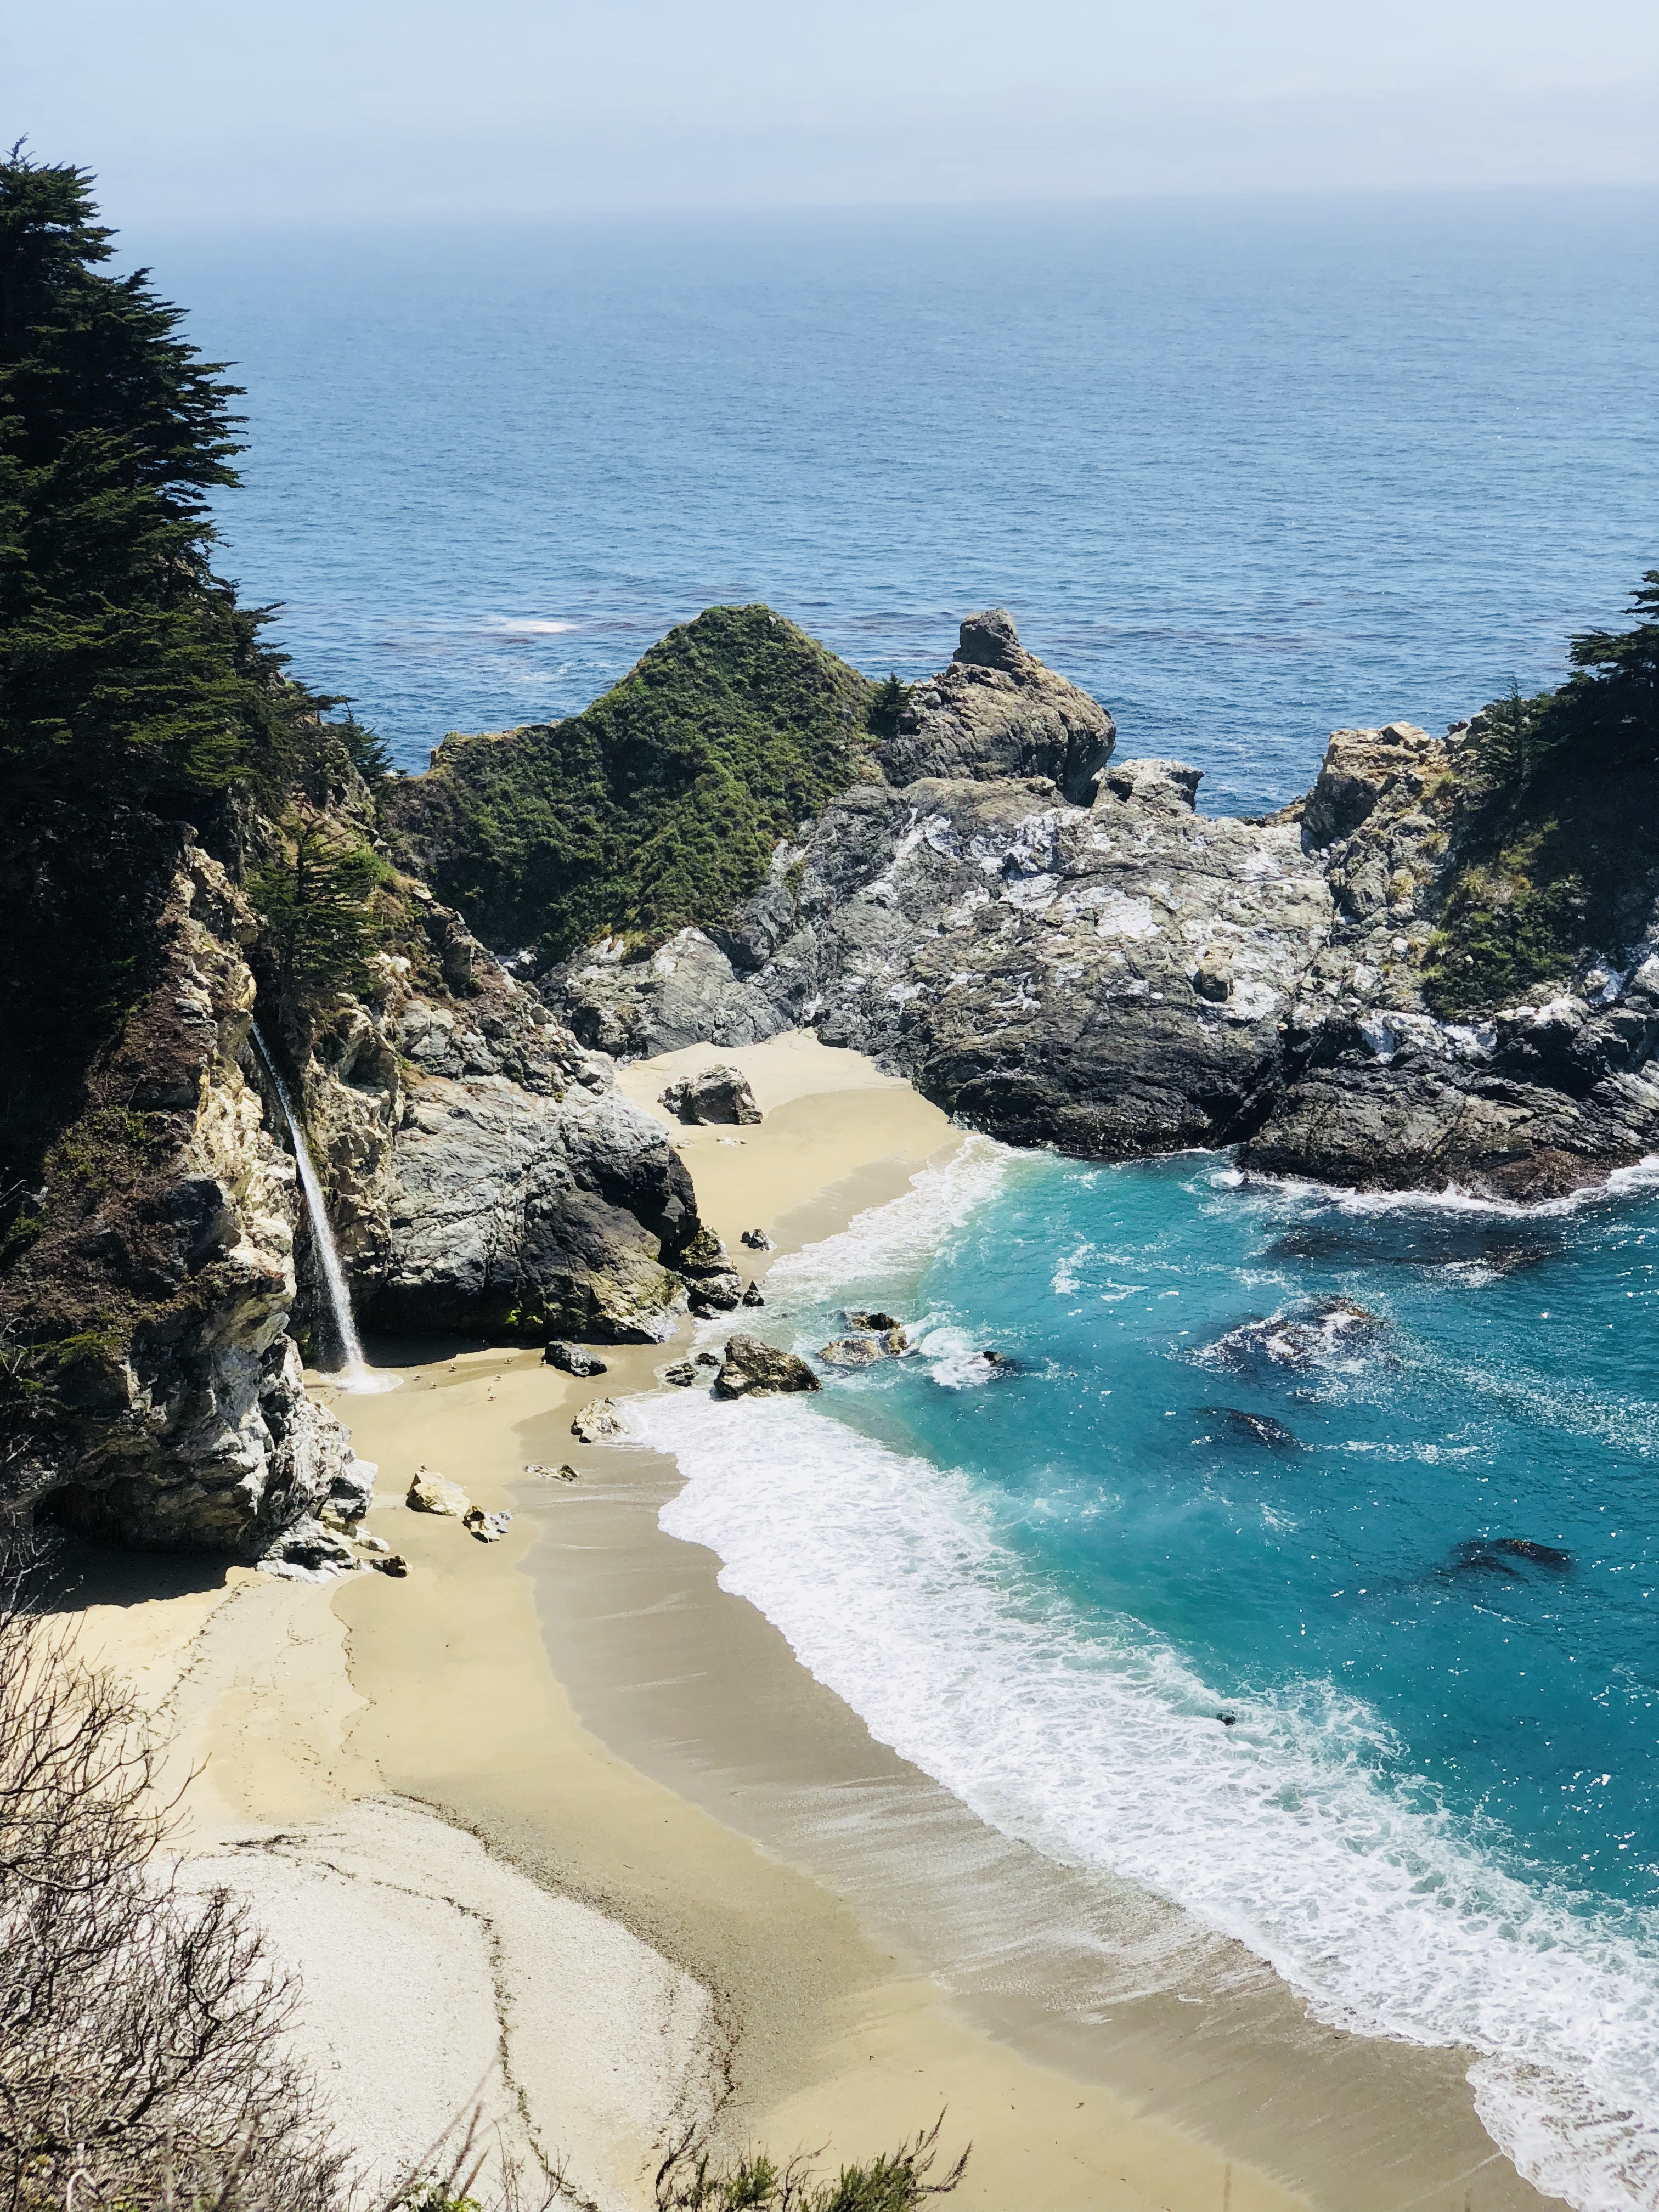 Photograph of McWay Falls in Julia Pfeiffer Burns State Park, Big Sur, California, by R.A.Myers.